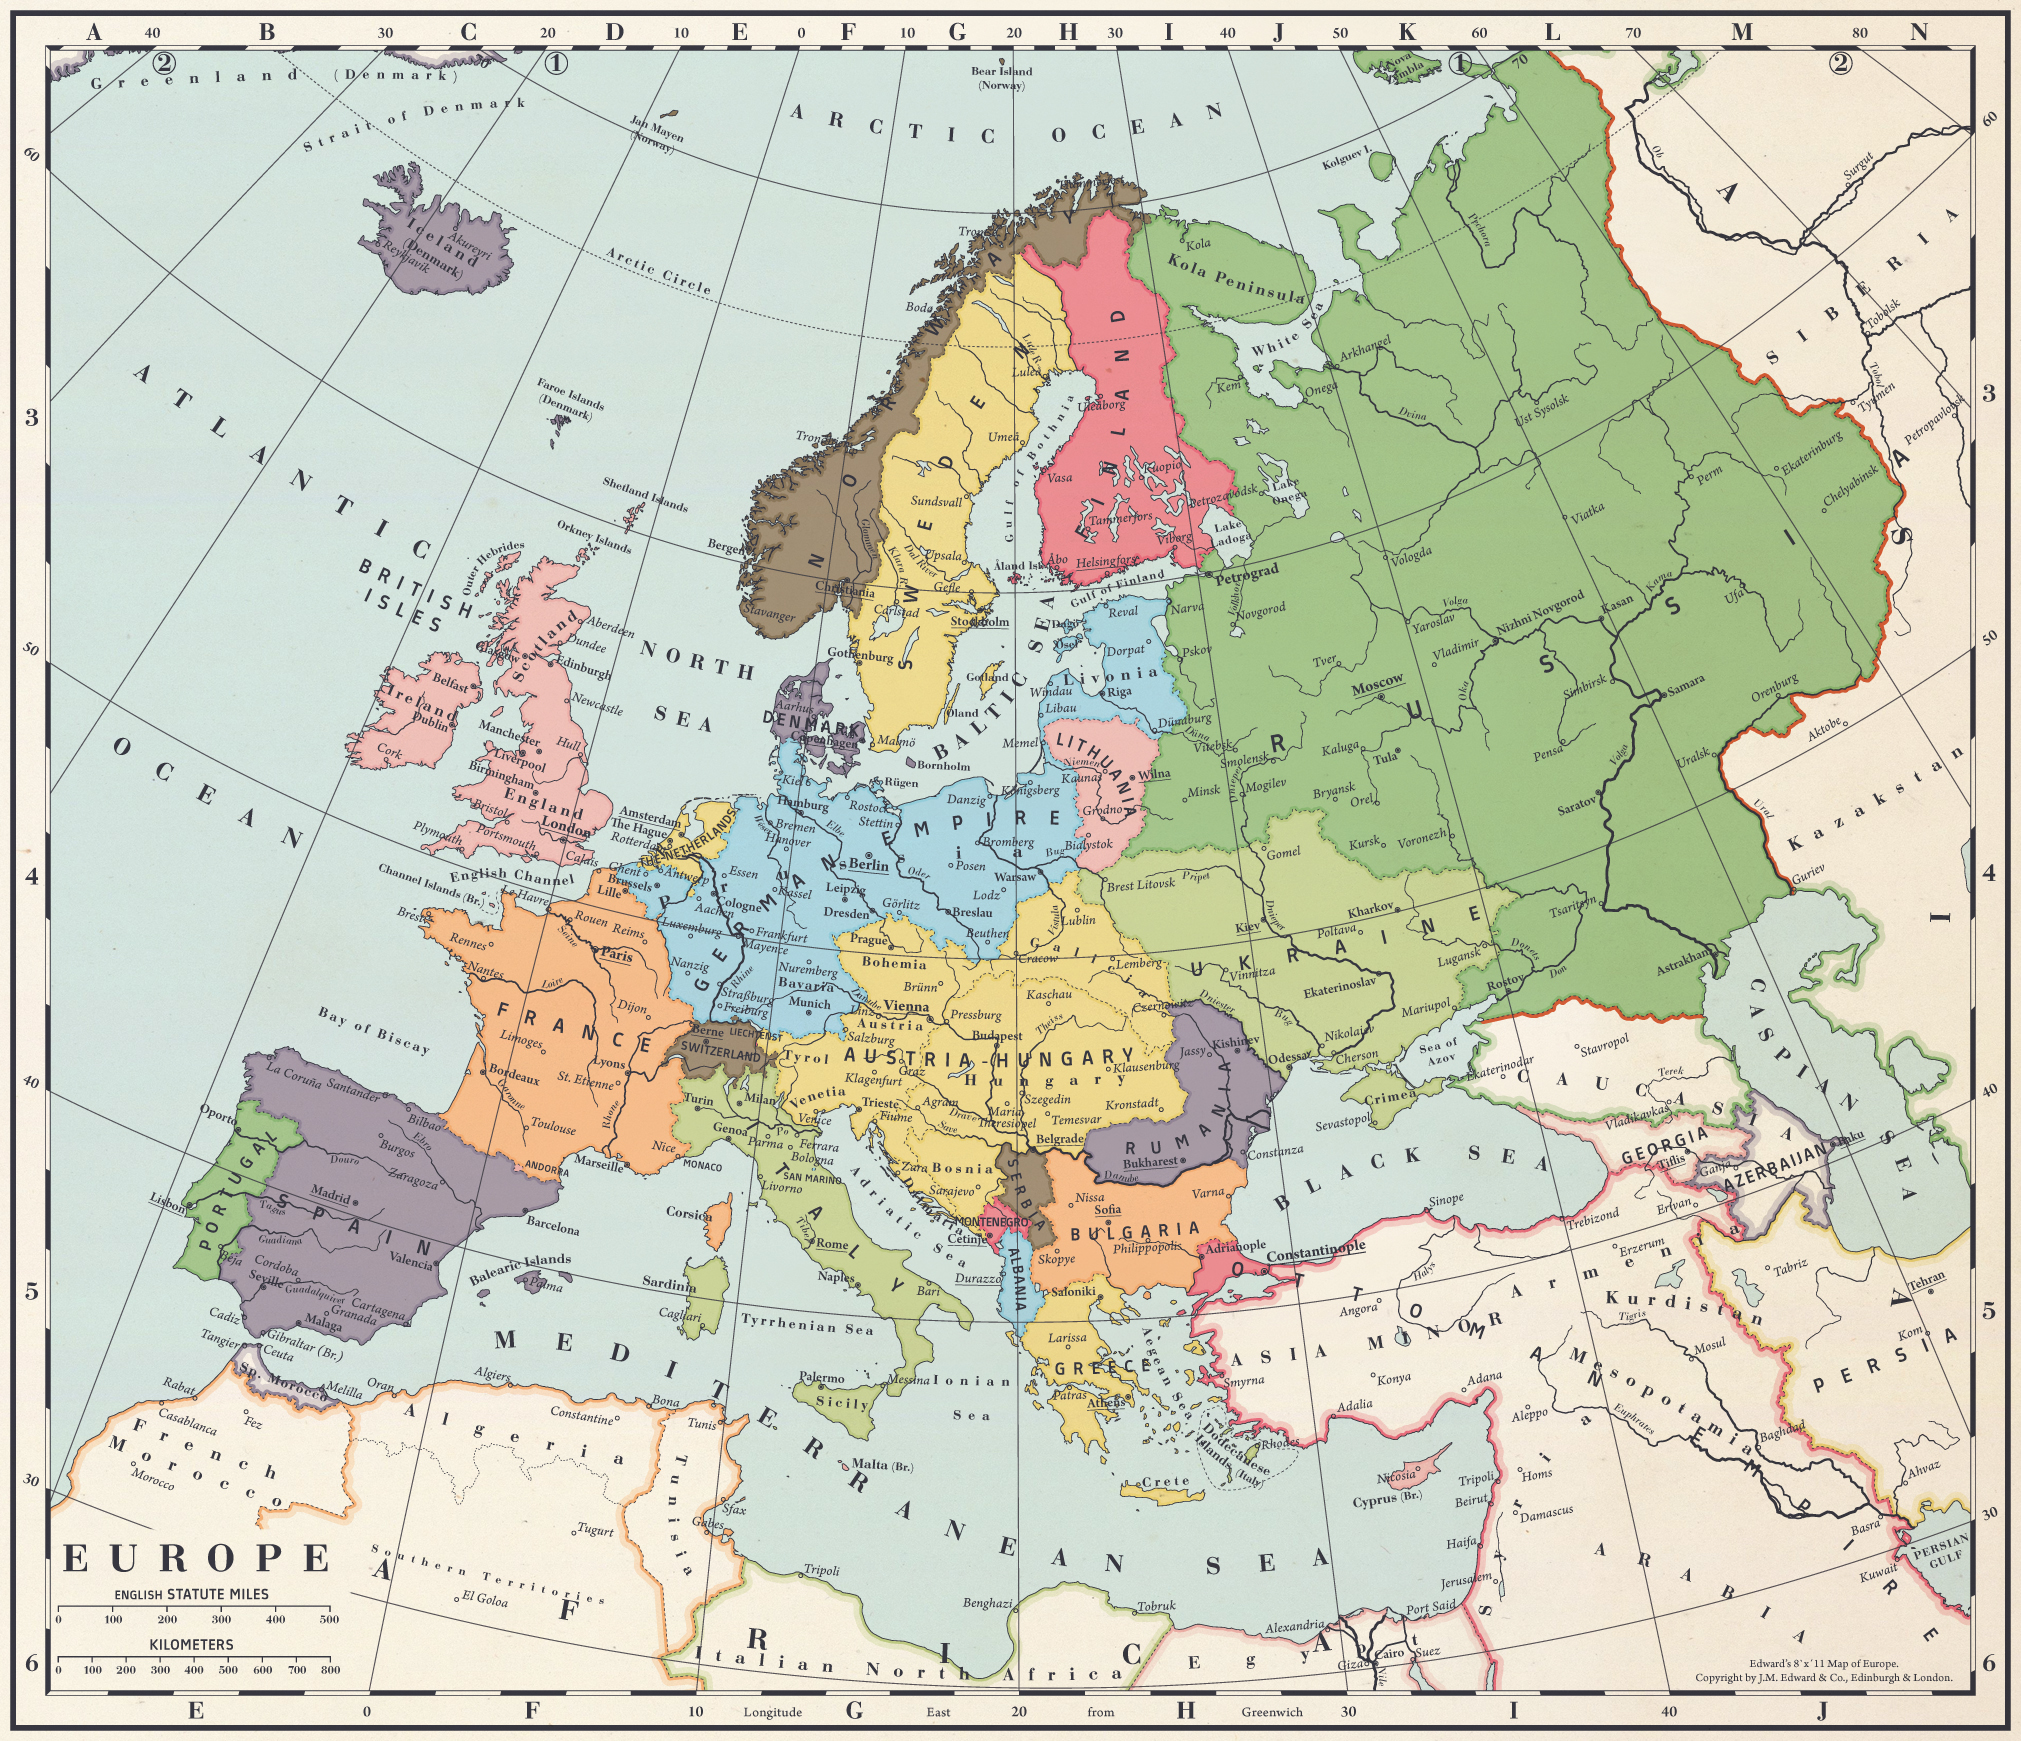 europe_after_a_central_powers_victory_by_1blomma-d9mimtz.jpg